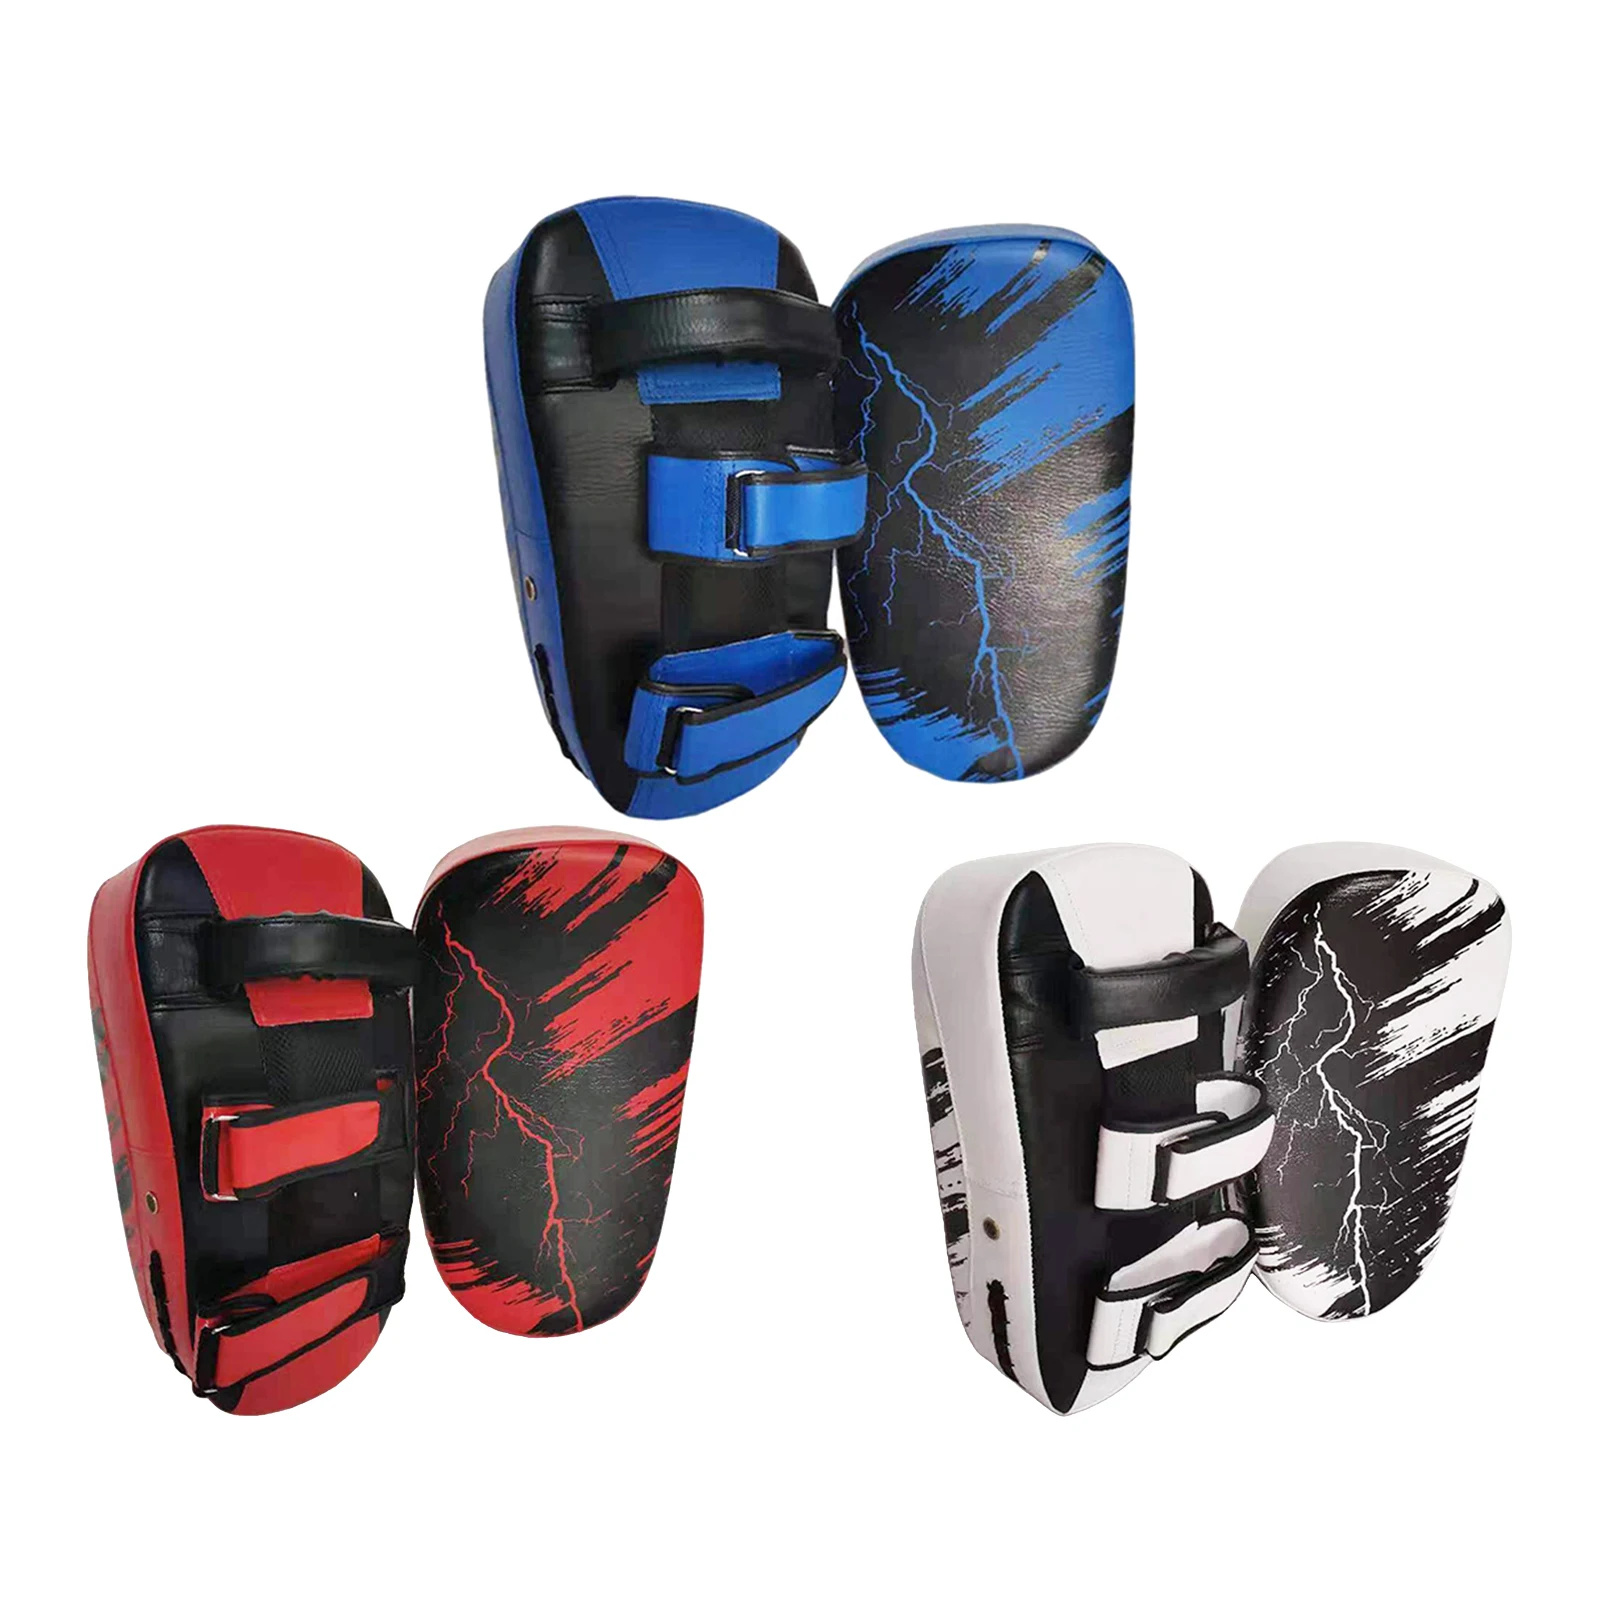 Kick Shield MMA Boxing Focus Pads Arm Punching Training Sparring Thai pad mitts 